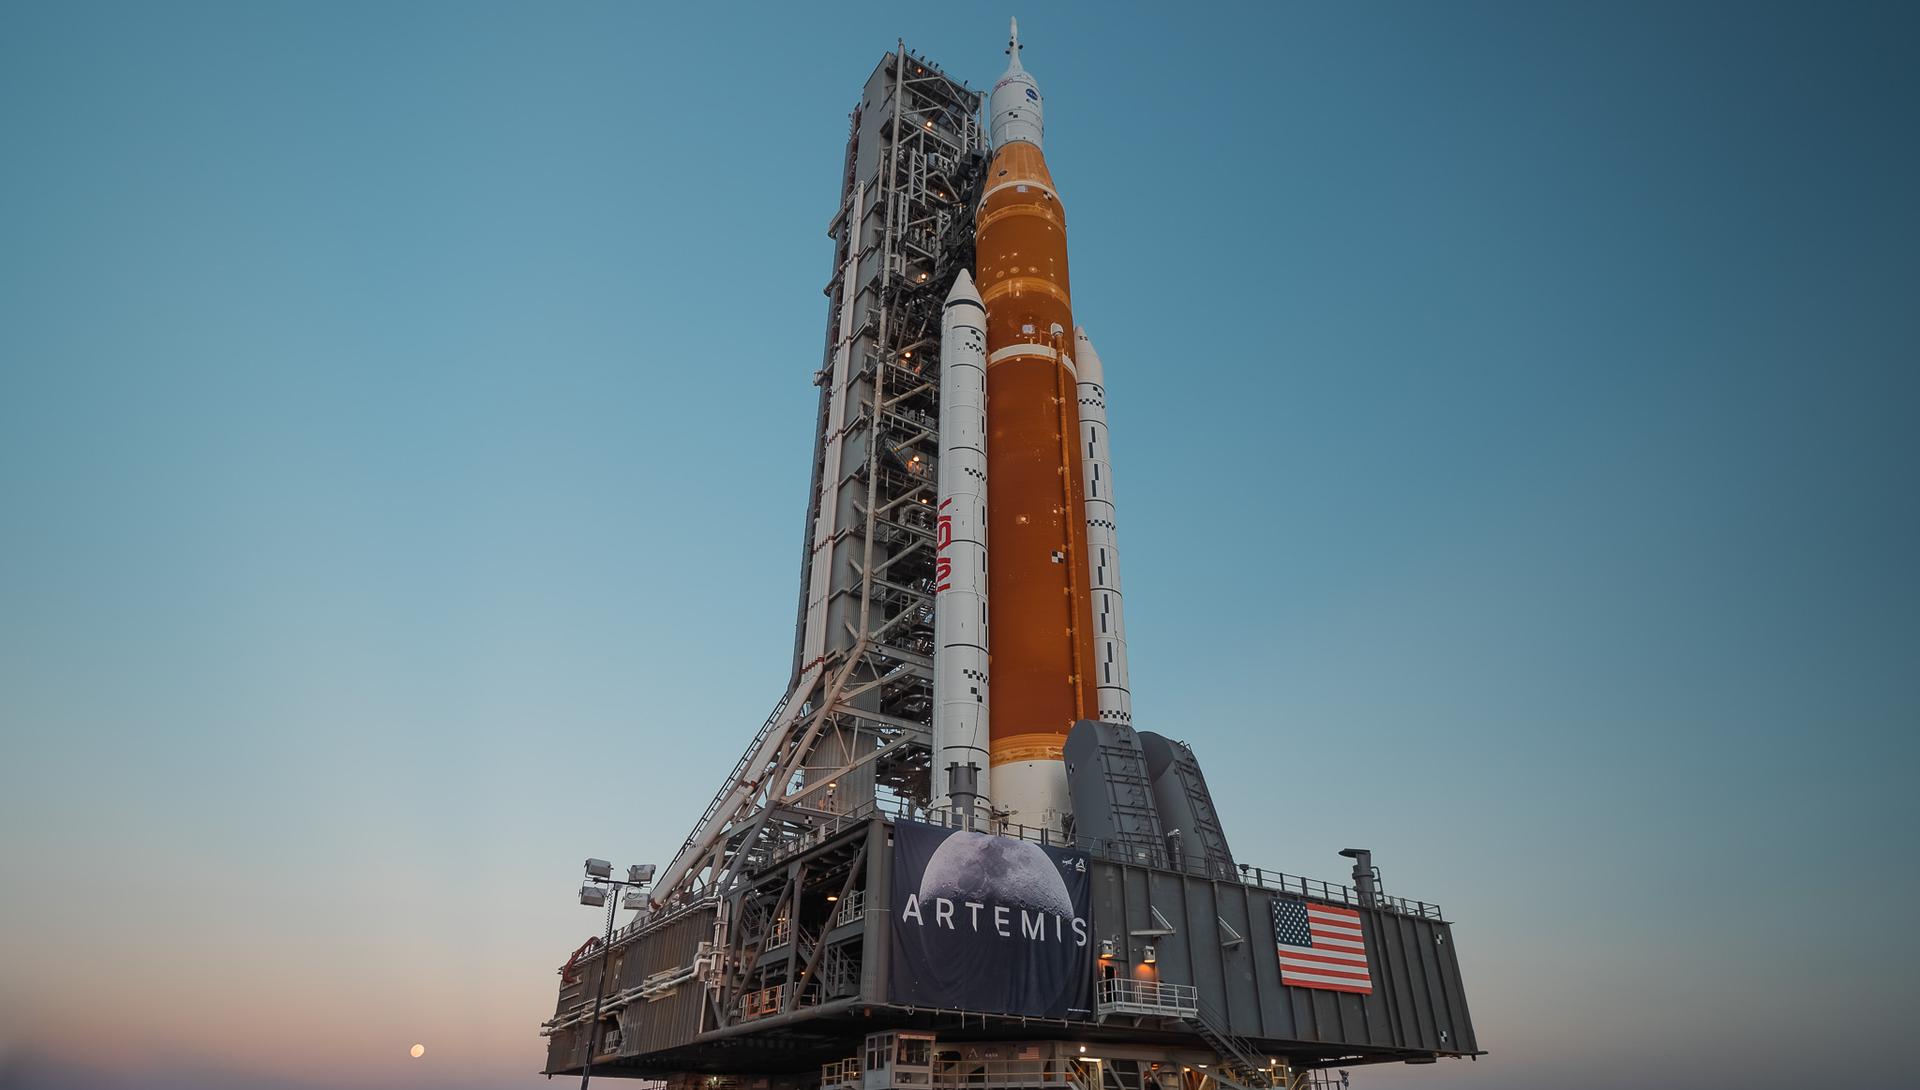 The Space Launch System (SLS) rocket and Orion Spacecraft roll out of the Vehicle Assembly Building (VAB) to Launch Pad 39B at NASA's Kennedy Space Center in Florida for the first time on March 17, 2022. Image: NASA / Brandon Hancock